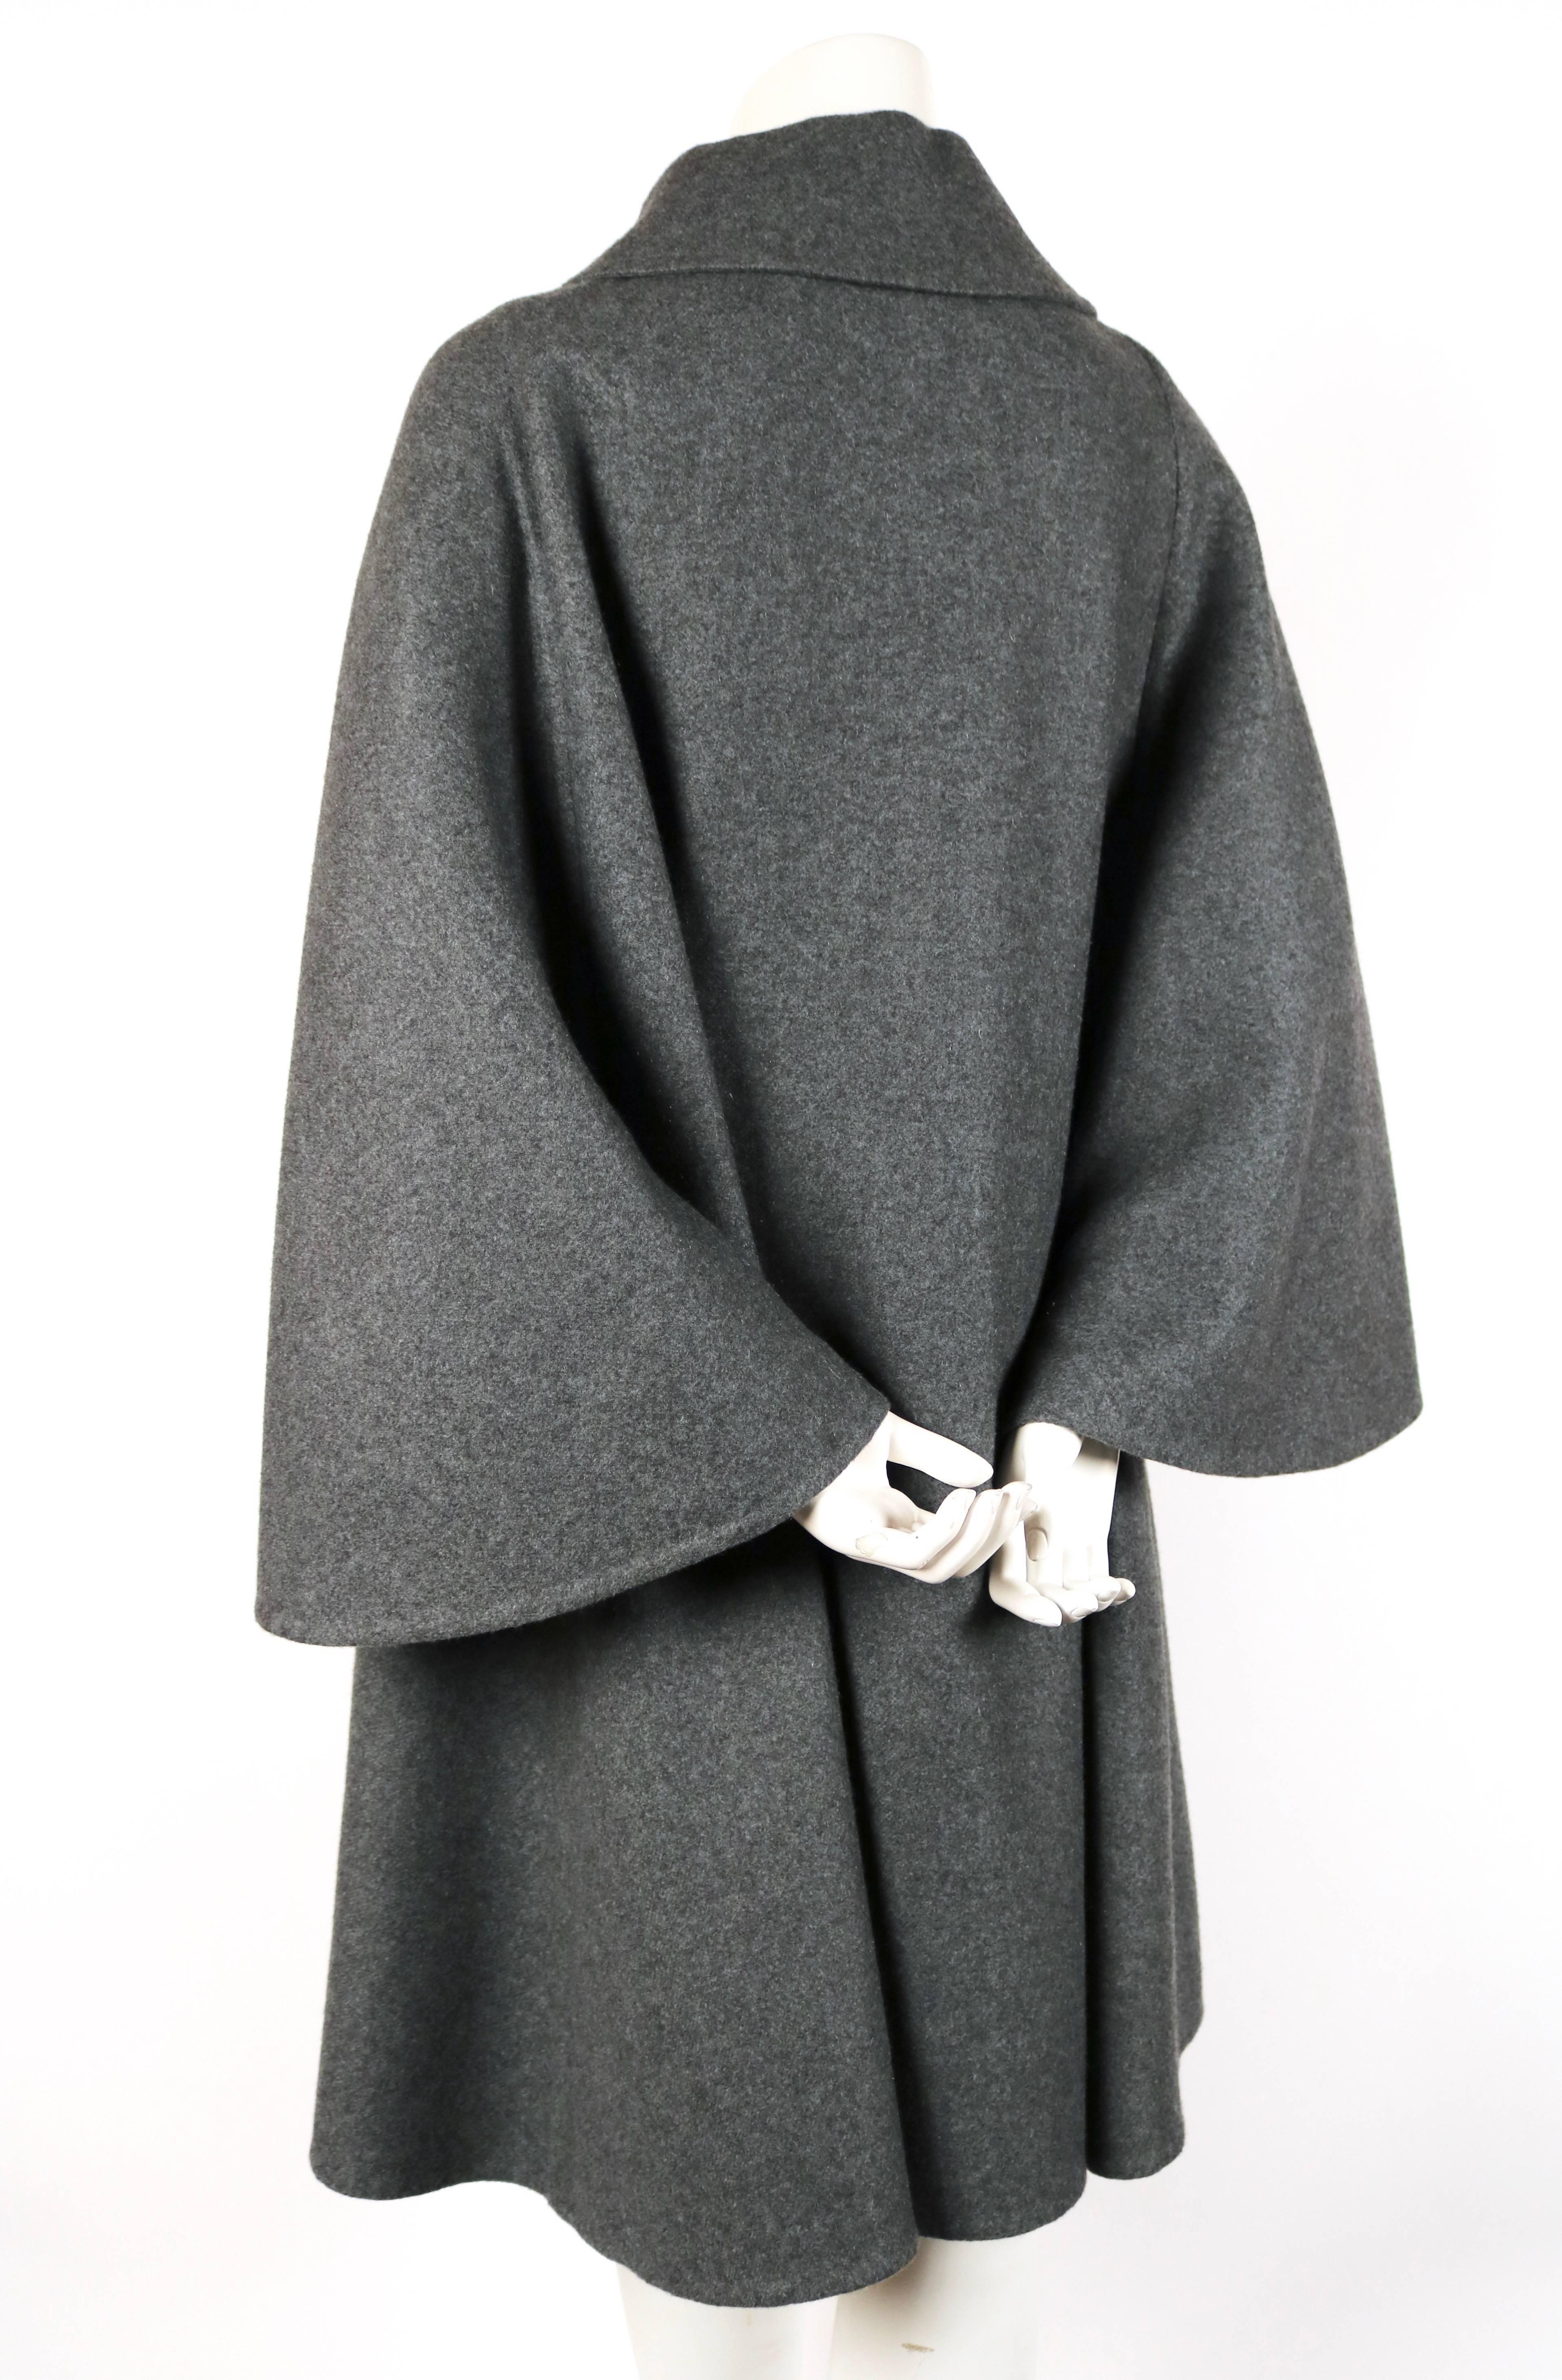 Unworn charcoal grey double faced cashmere cape coat from Hermes dating to fall of 2012. French size 36 however this may fit various sizes due to oversized cut. Approximate measurements: bust 48